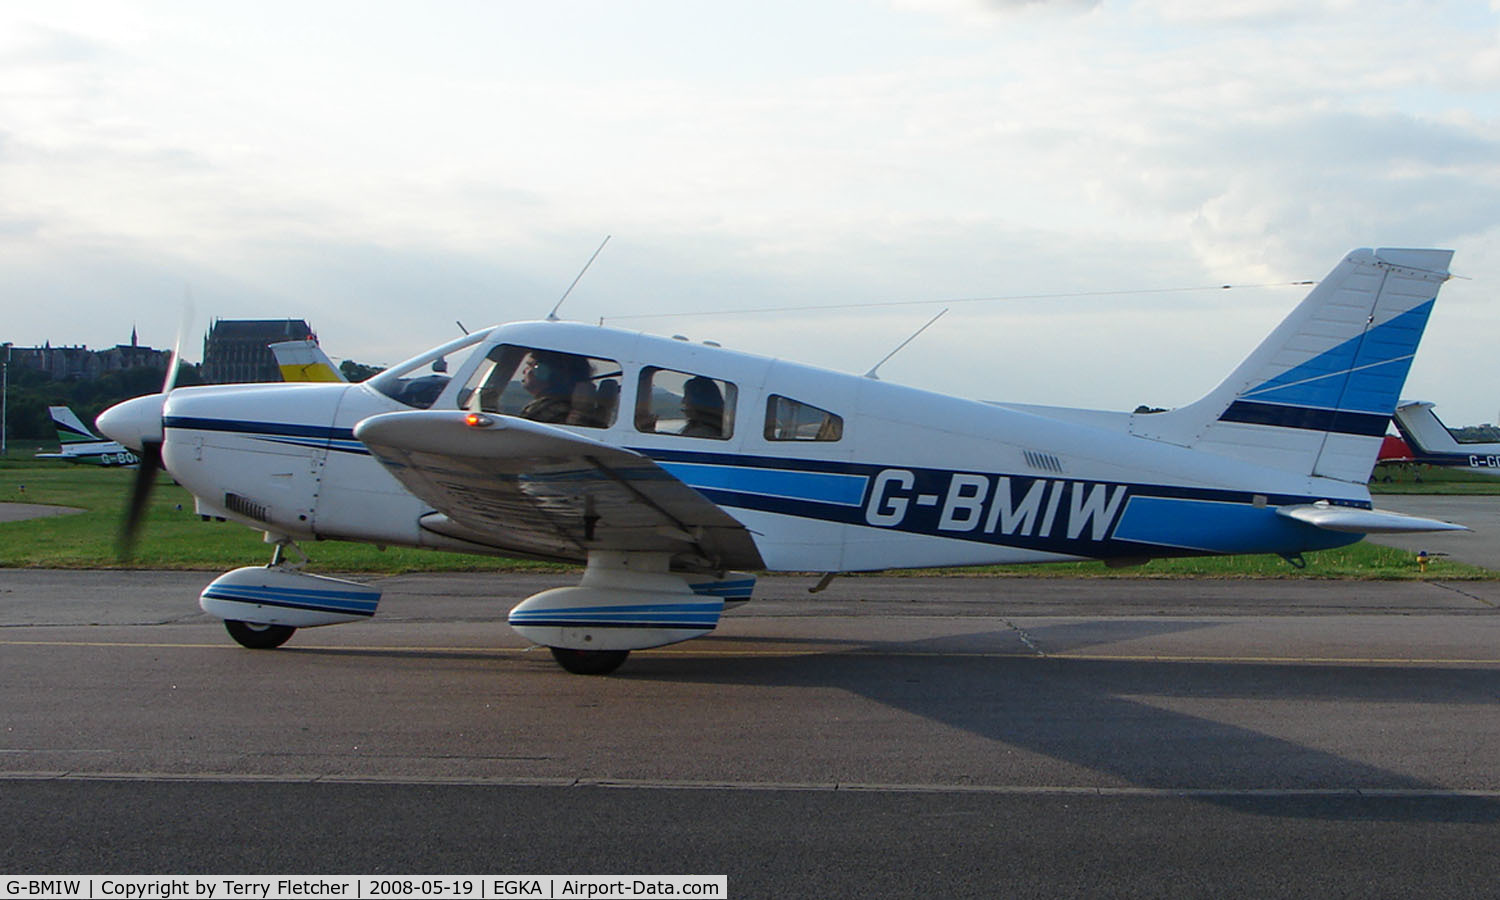 G-BMIW, 1981 Piper PA-28-181 Cherokee Archer II C/N 28-8190093, A pleasant May evening at Shoreham Airport , Sussex , UK